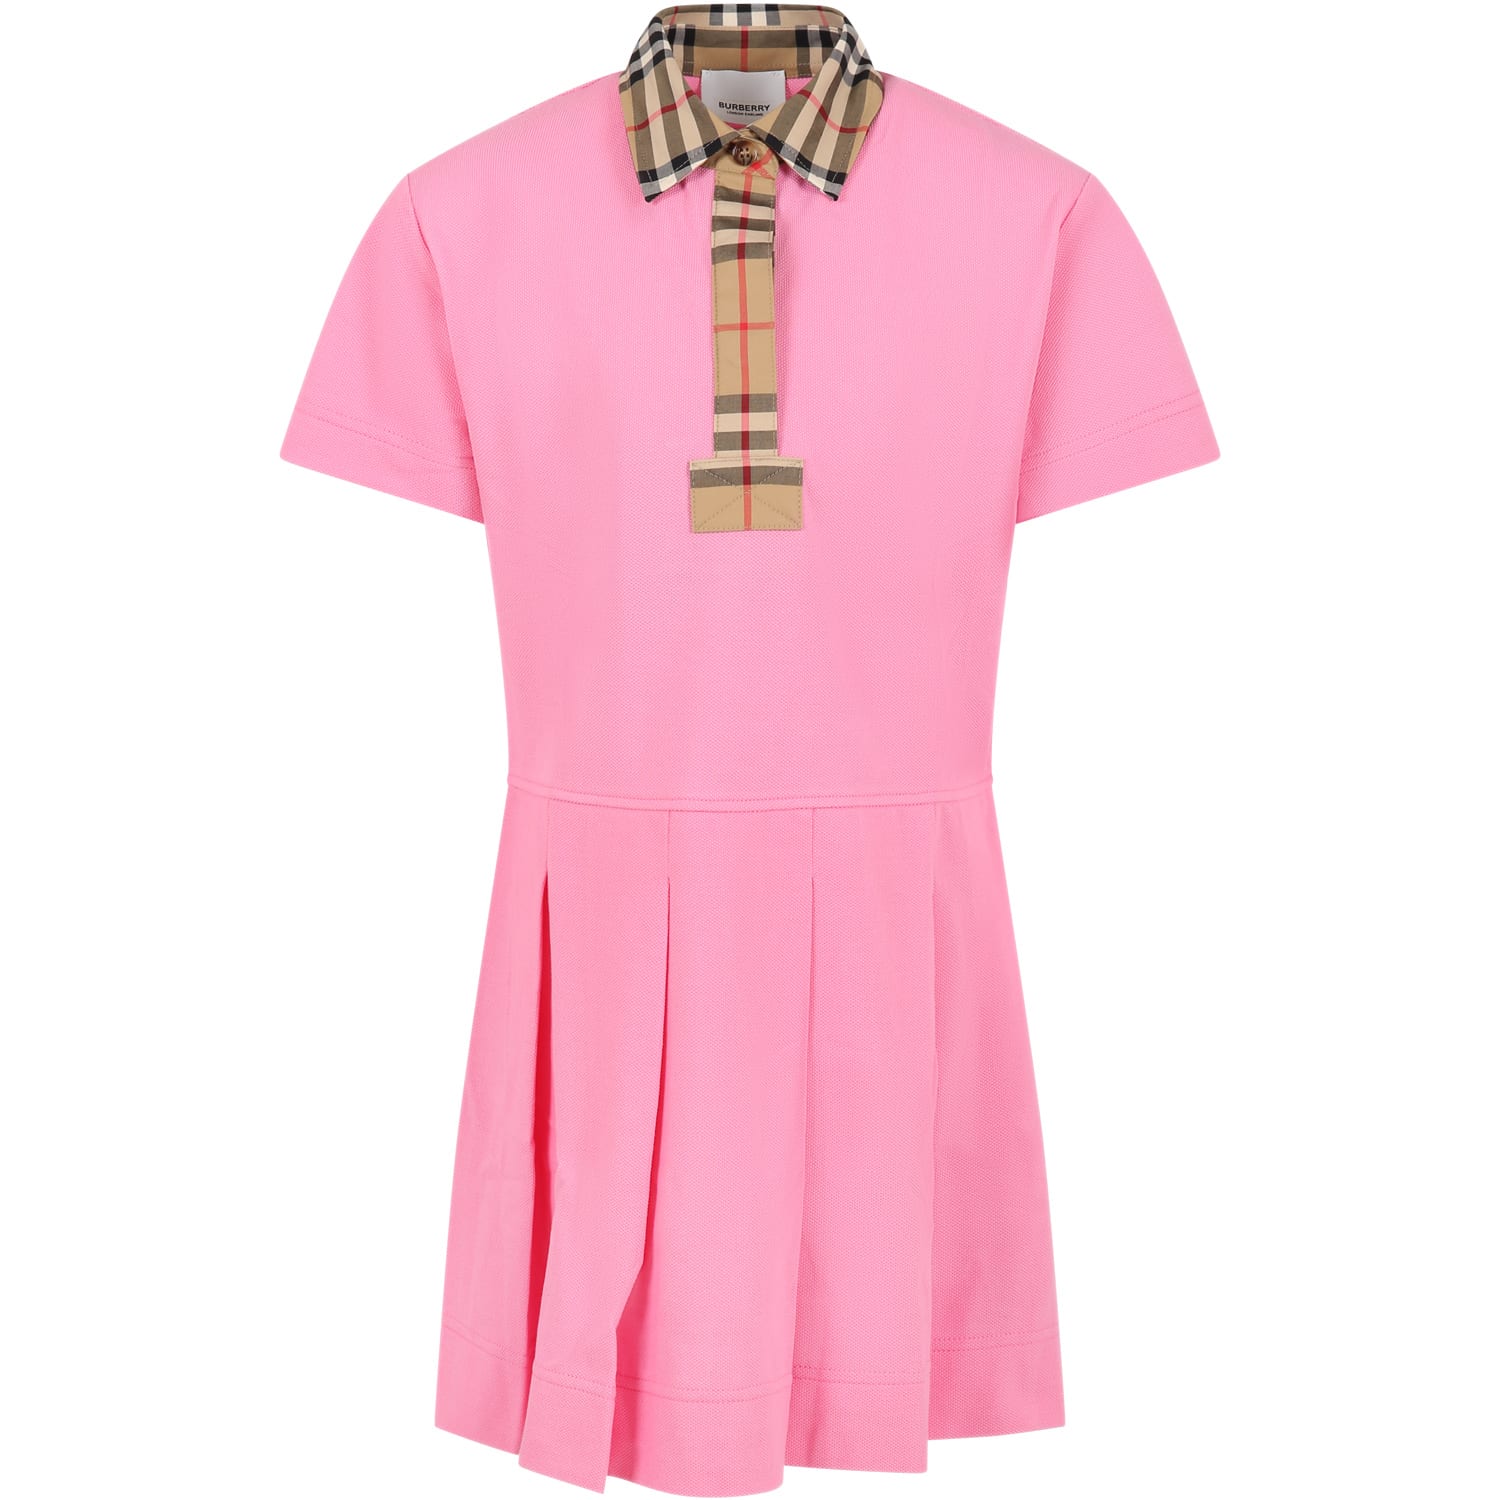 Burberry Pink Dress For Girl With Iconic Vintage Check